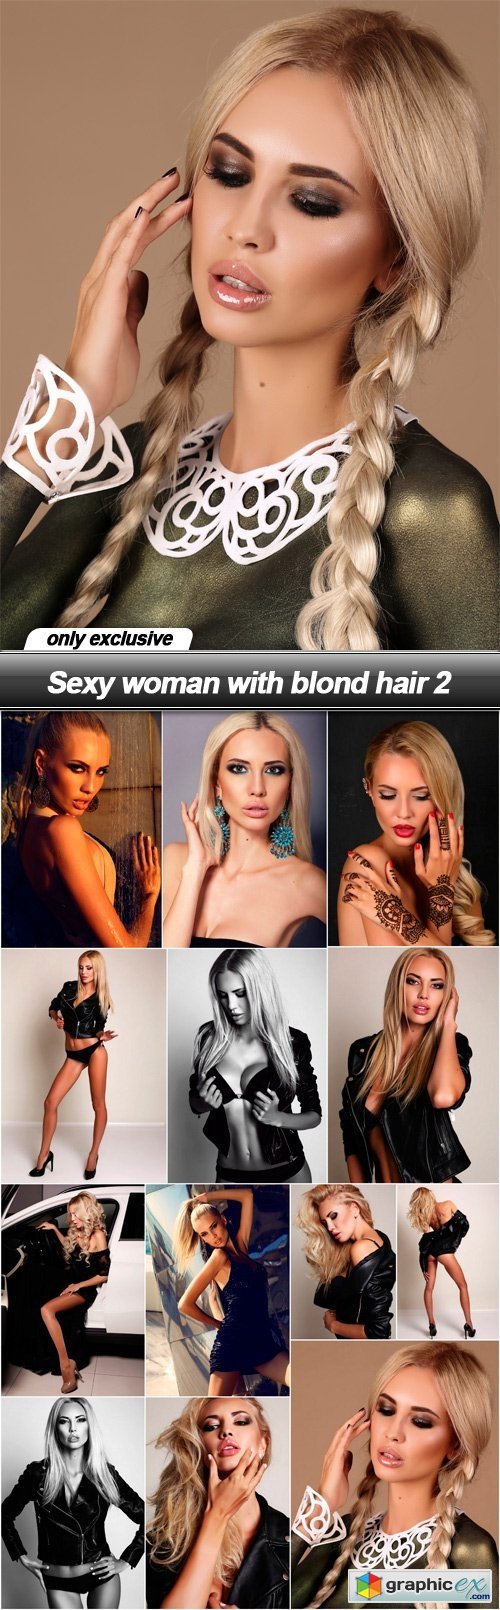 Sexy woman with blond hair 2 - 13 UHQ JPEG